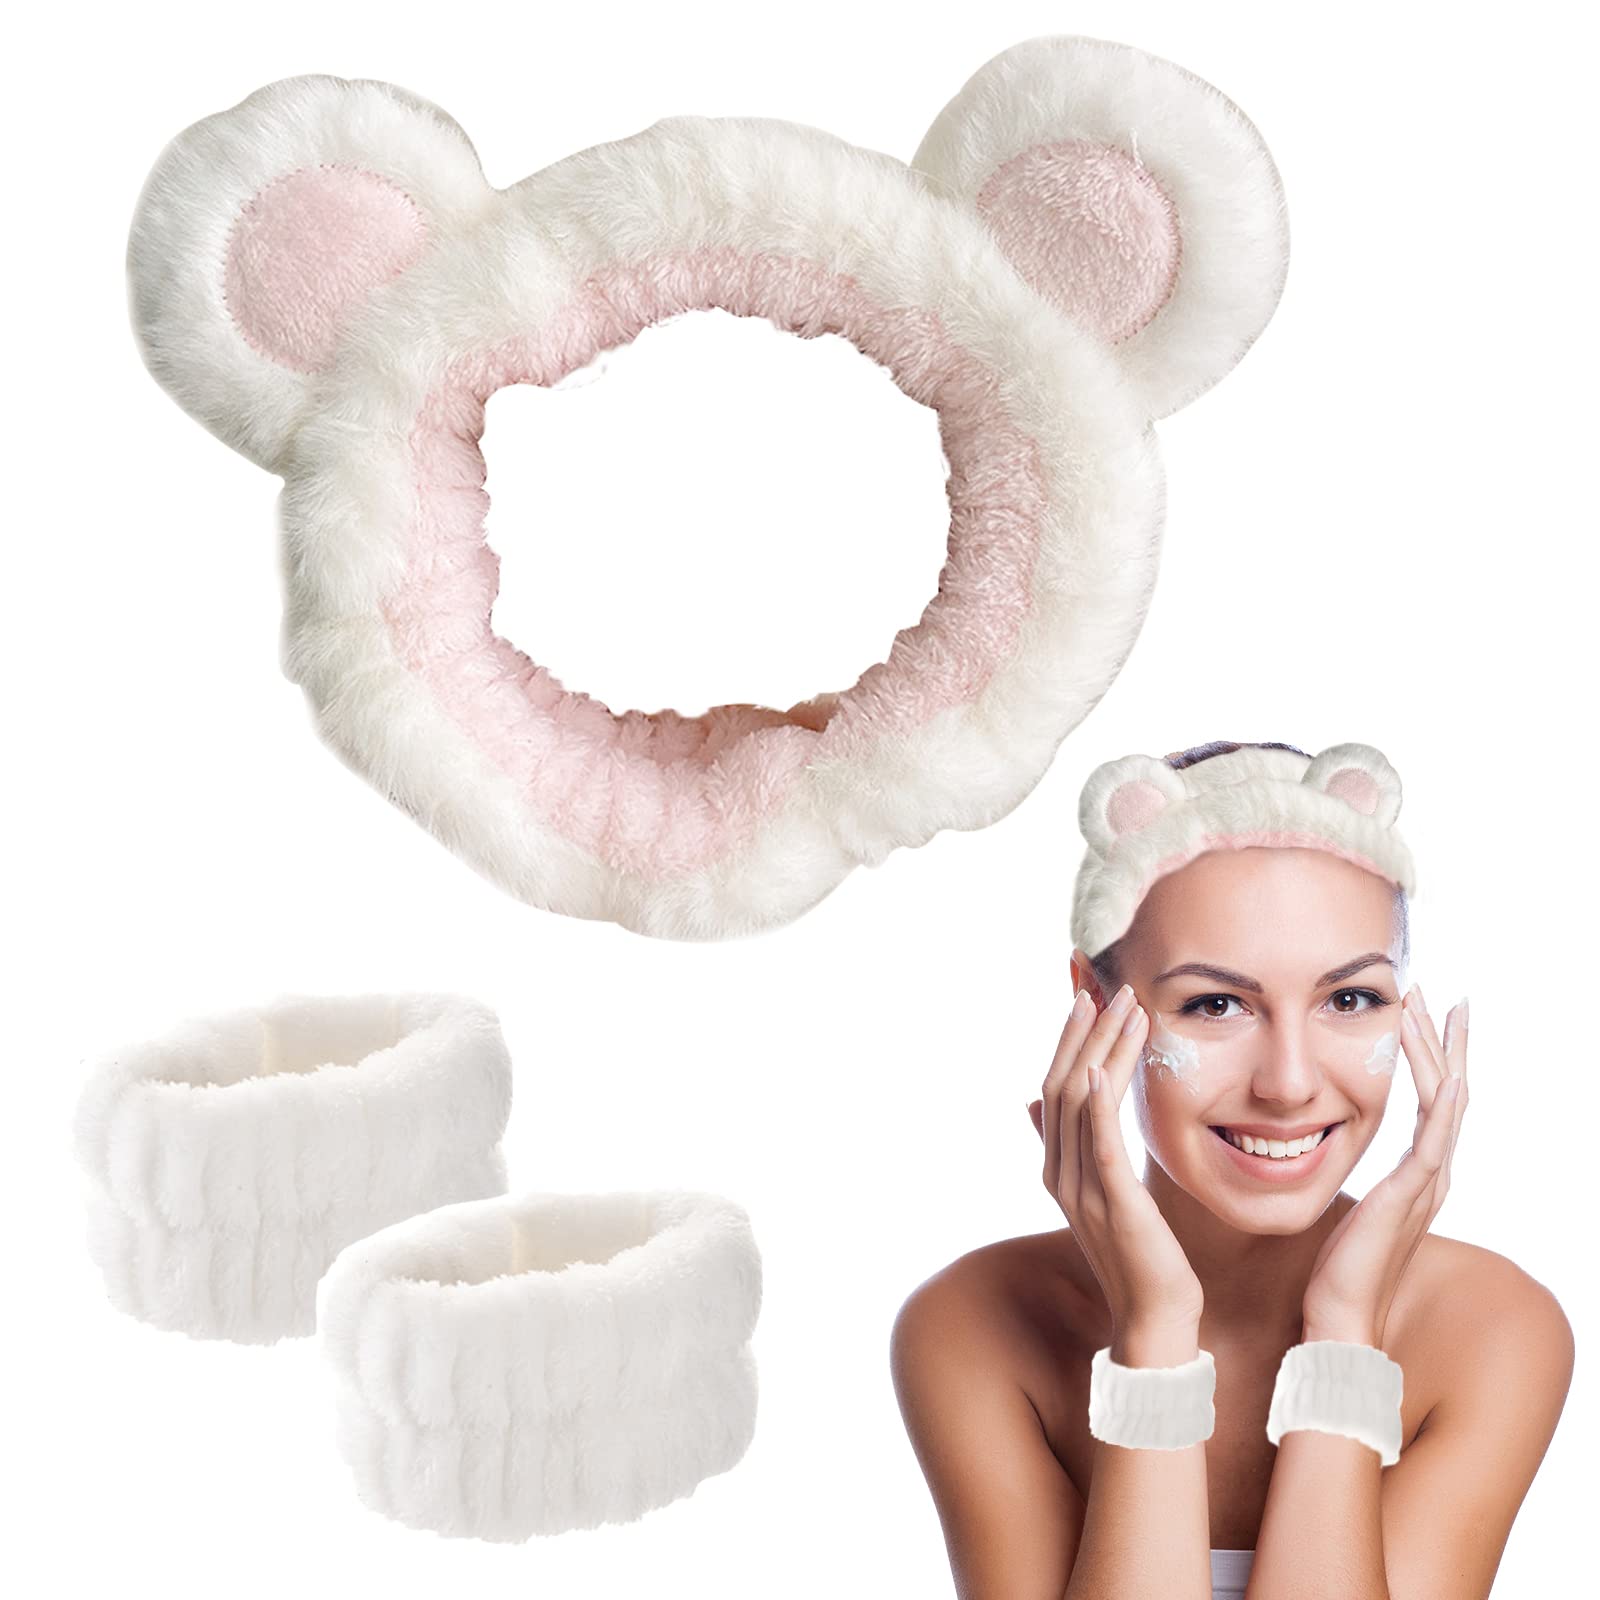 Spa headband for washing face and matching wrist strap, fuzzy skin